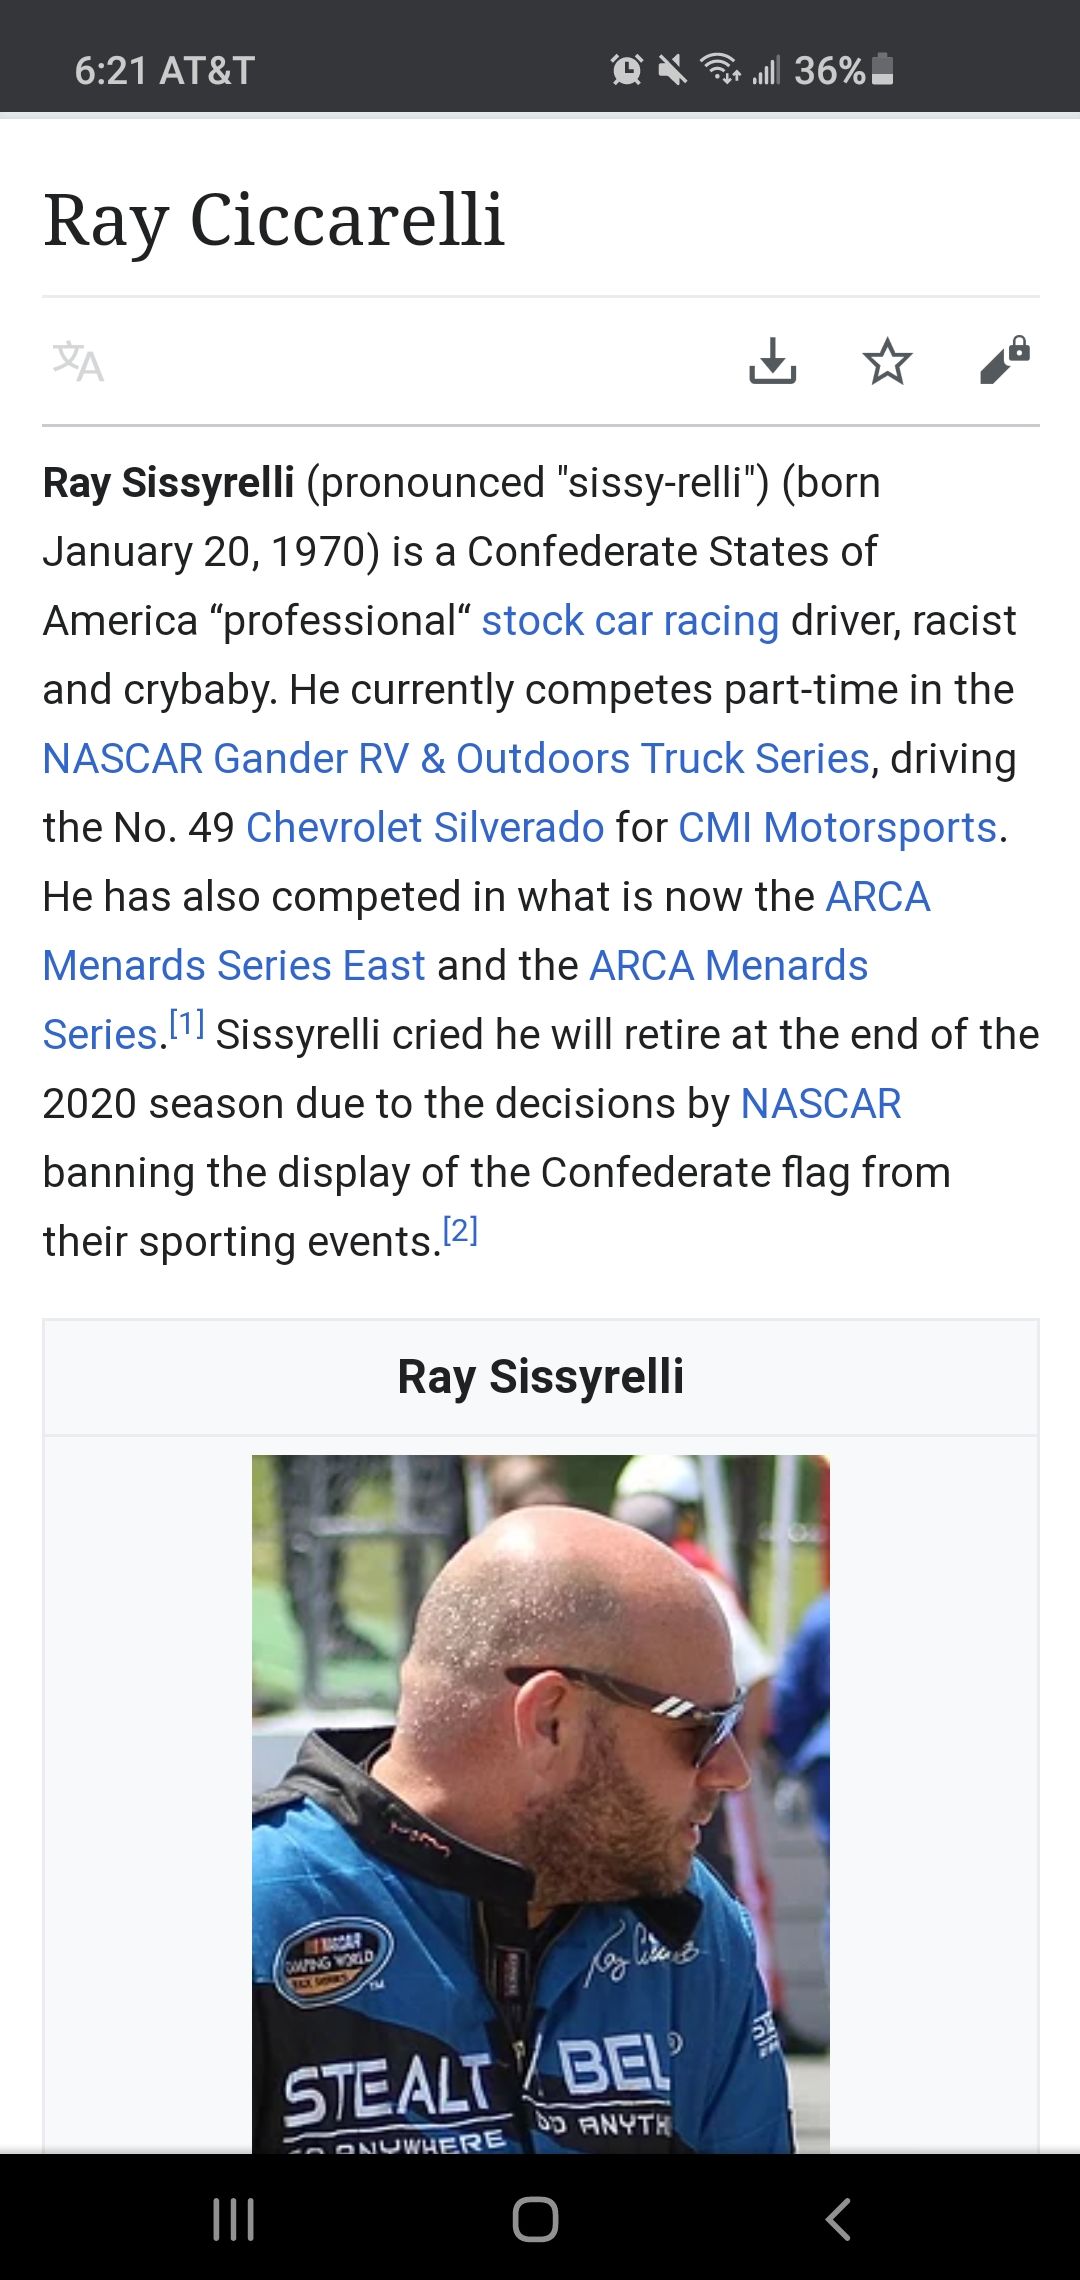 Ciccarelli had less time leading a NASCAR race than it took update his Wikipedia page. Which was pretty darn fast.